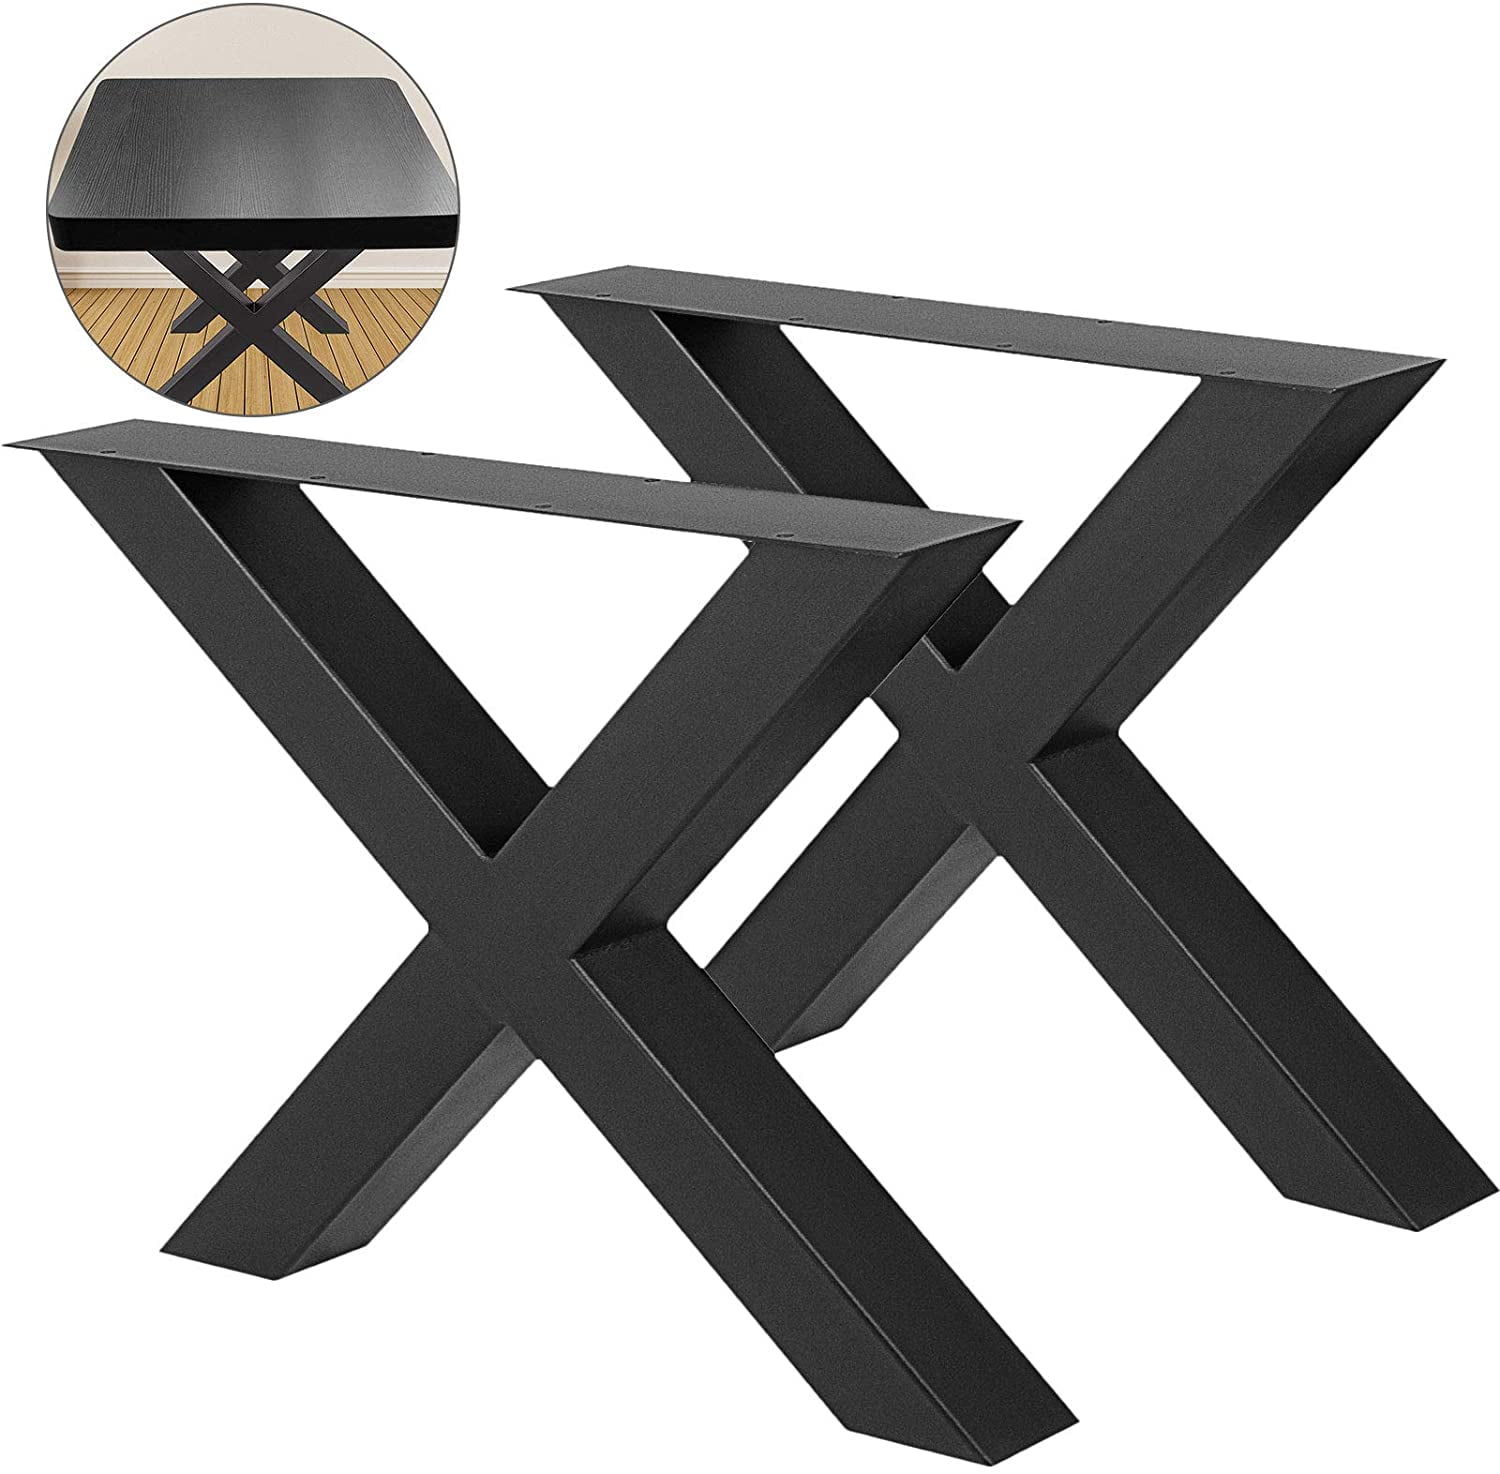 X shape legs for dinning table in rough metal shade, 16